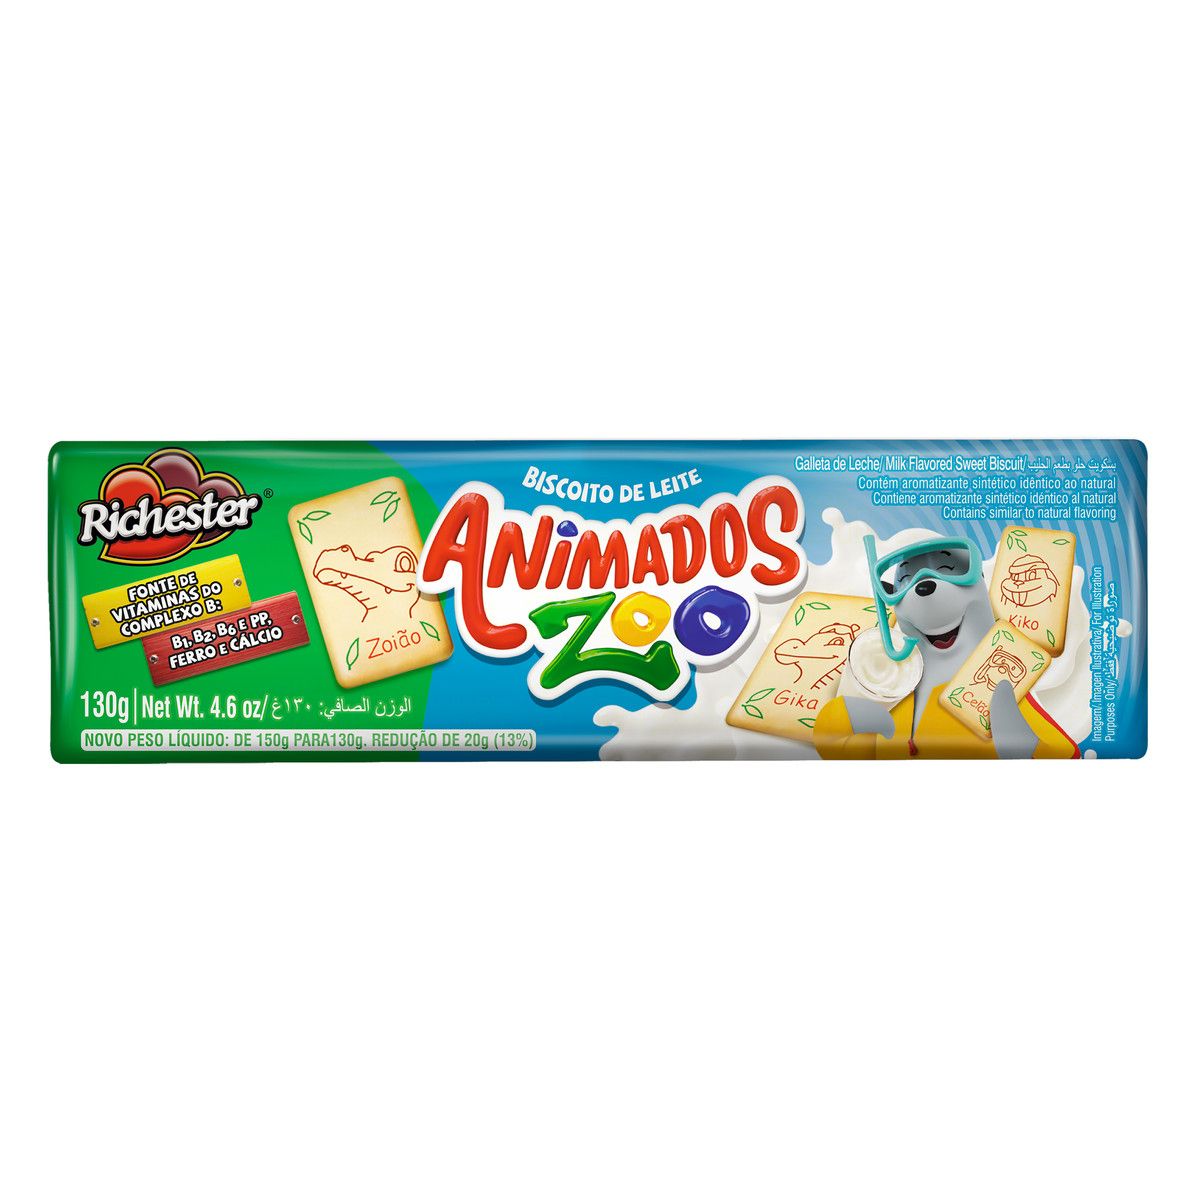 Biscoito Leite Richester Animados Zoo Pacote 130g image number 0